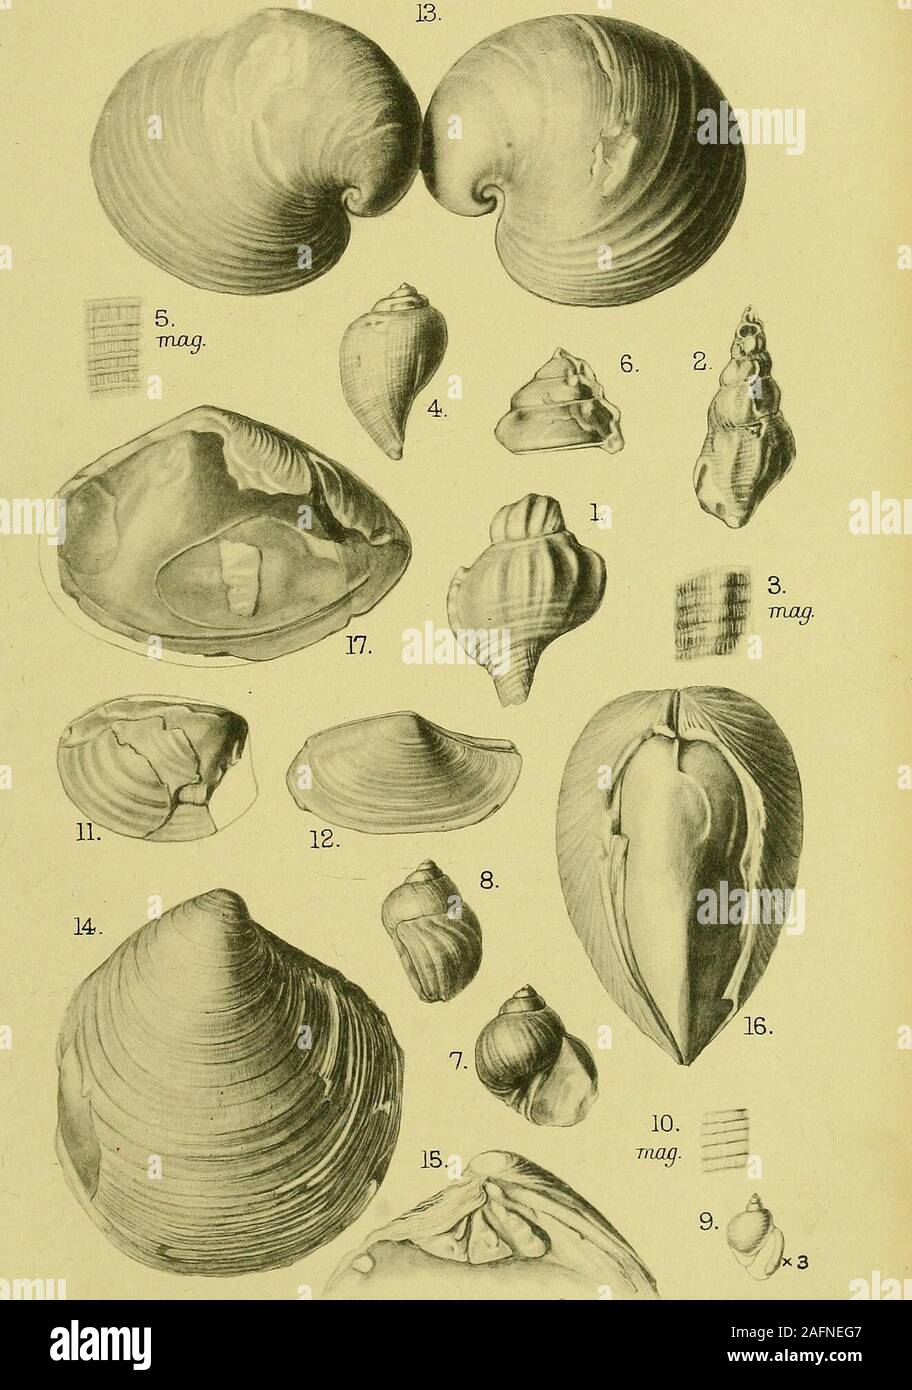 . The Quarterly journal of the Geological Society of London. 4.) 3. The same, showing magnified sculpture. 4. Ficus simplex (Beyrich). (See p. 14.) 5. The same, showing details of sculpture, magnified. 6. Xenophora sp. (See p. 14.) Fragmentary specimen exhibiting adherent cavities on the whorl. 7. Naticina alderi (E. Forbes). (See p. 15.) 8. The same. 9. Ringiculella ventricosa (J. de C. Sowerby). (See p. 15.) Front. view, X 3. 10. The same, showing sculpture lines, magnified. 11. Nucula Isevigata J. Sowerby. (See p. 16.) 12. Yoldia oblongoides (S. V. Wood). (See p. 16.) 13. Isocardia liumana Stock Photo